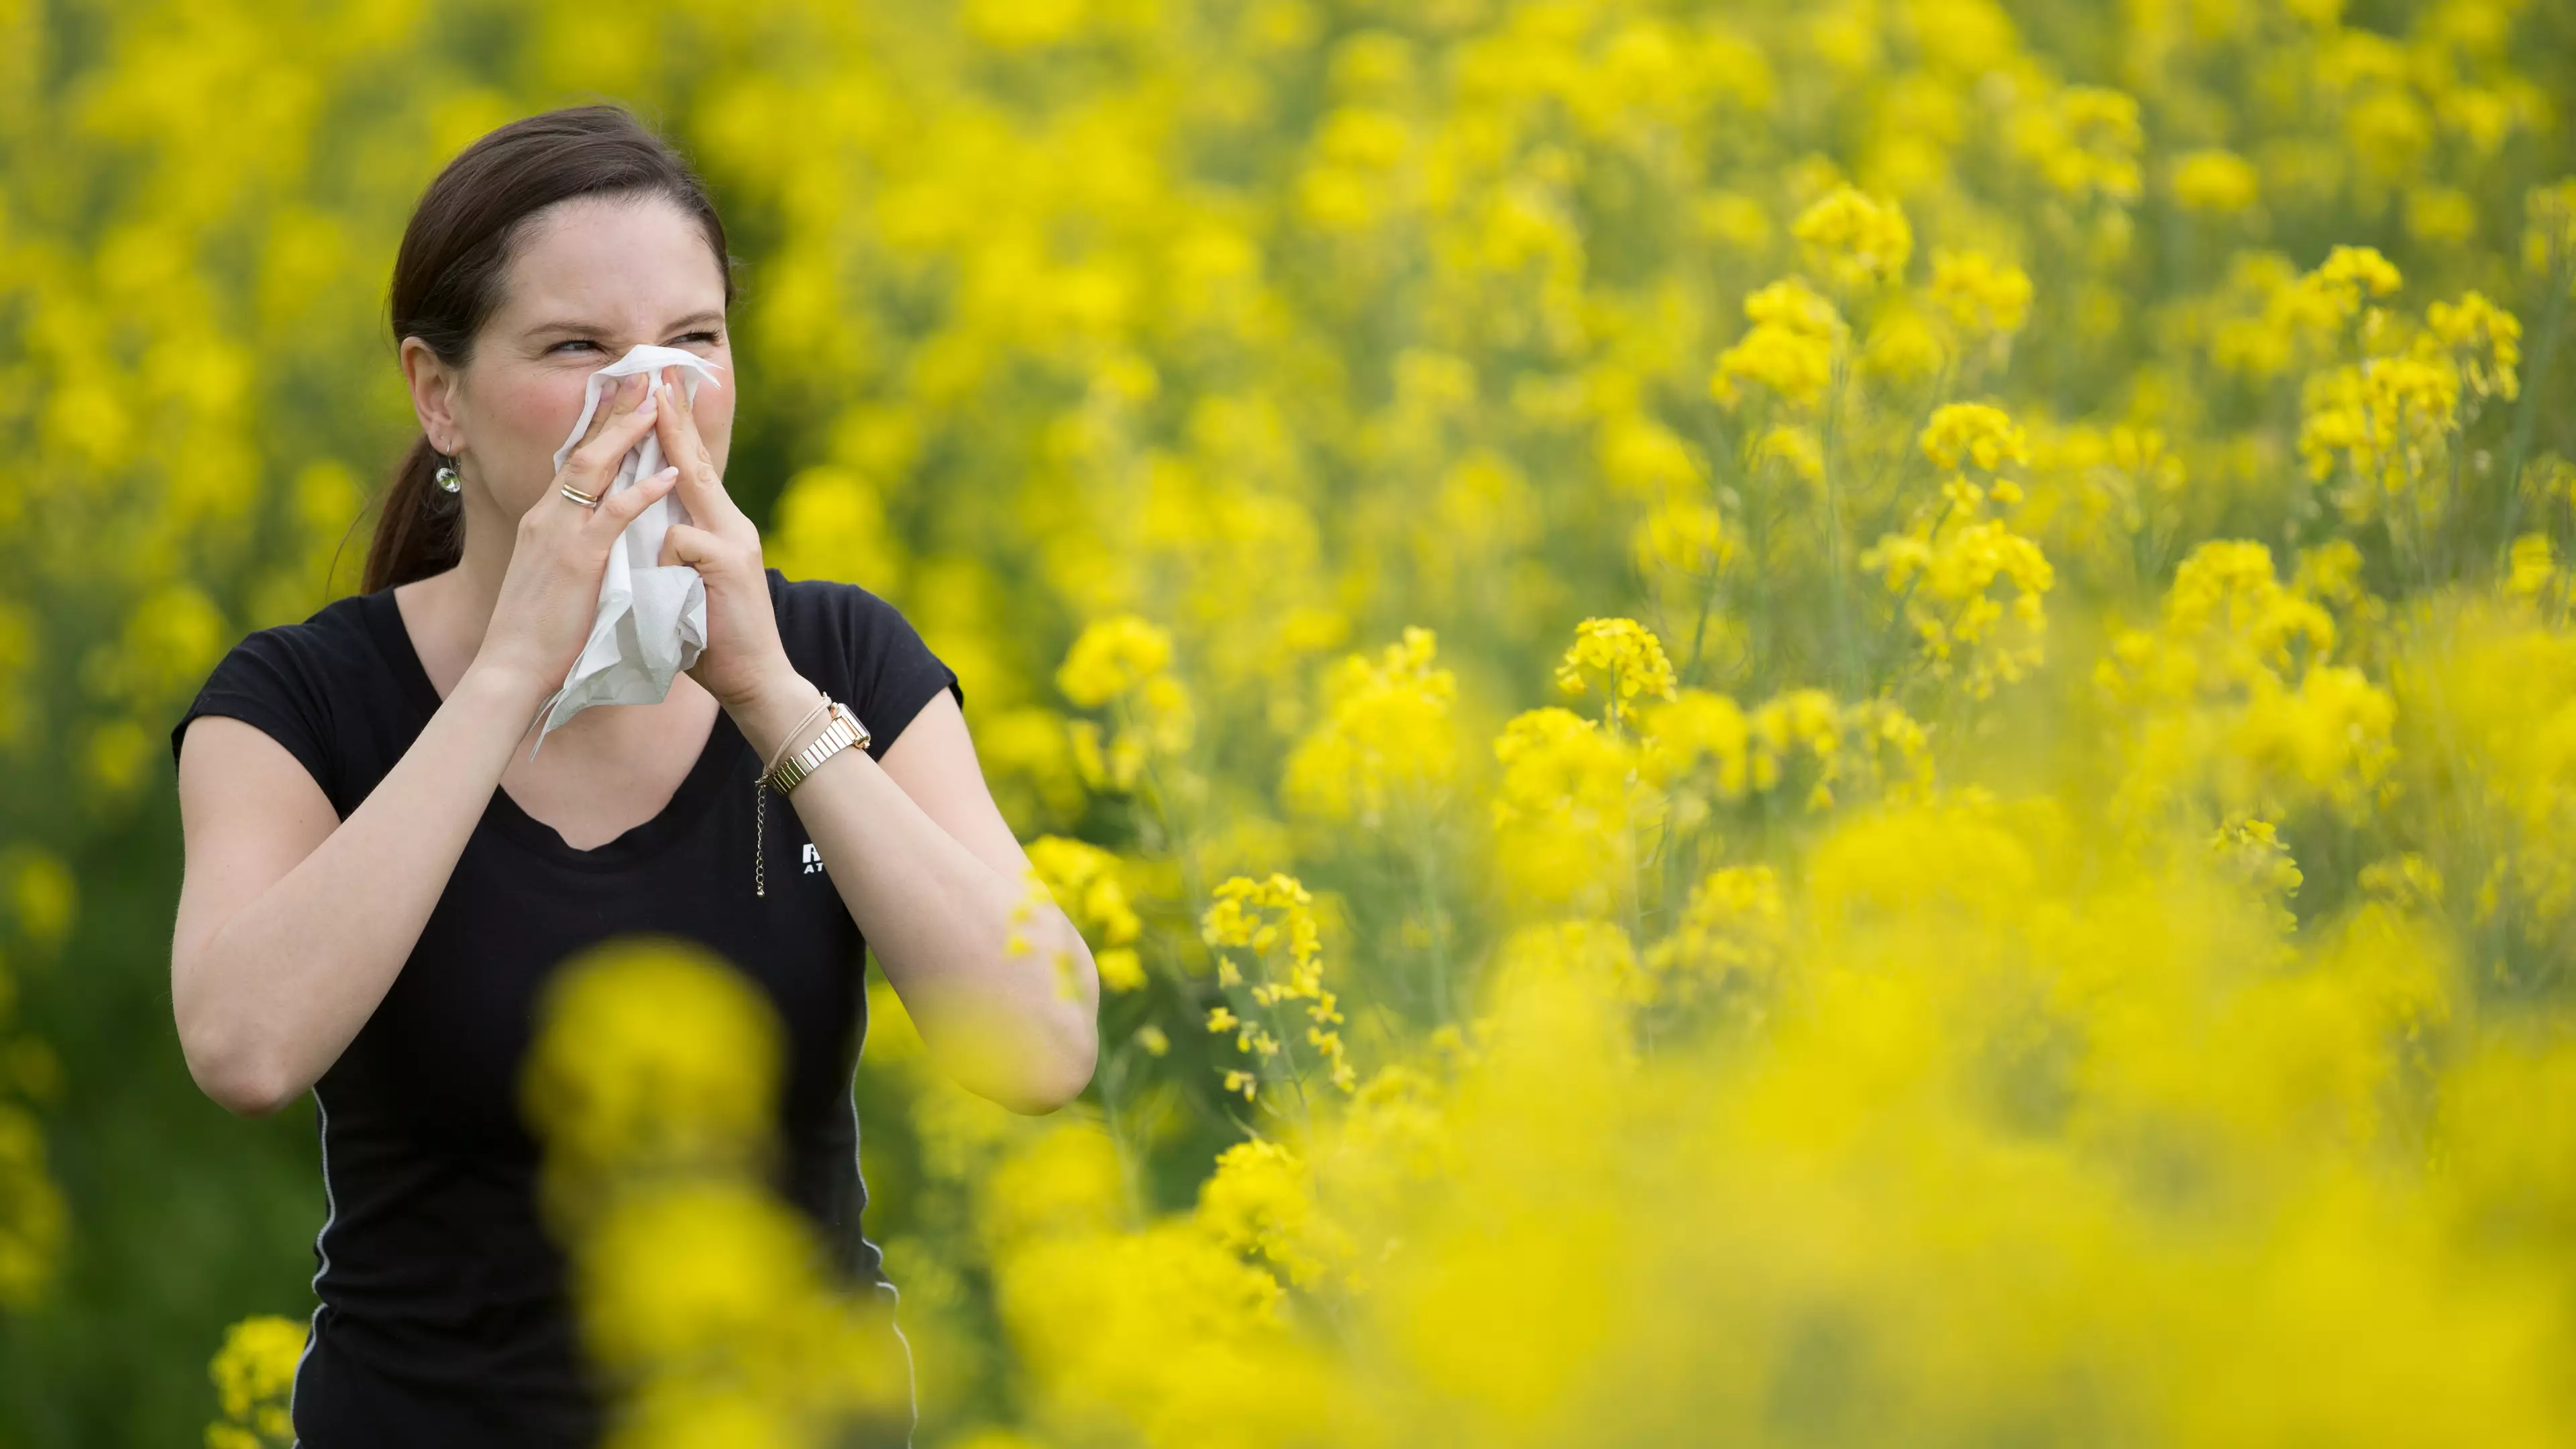 Hay Fever Warning As High Pollen Count Forecast For Large Areas Of UK.